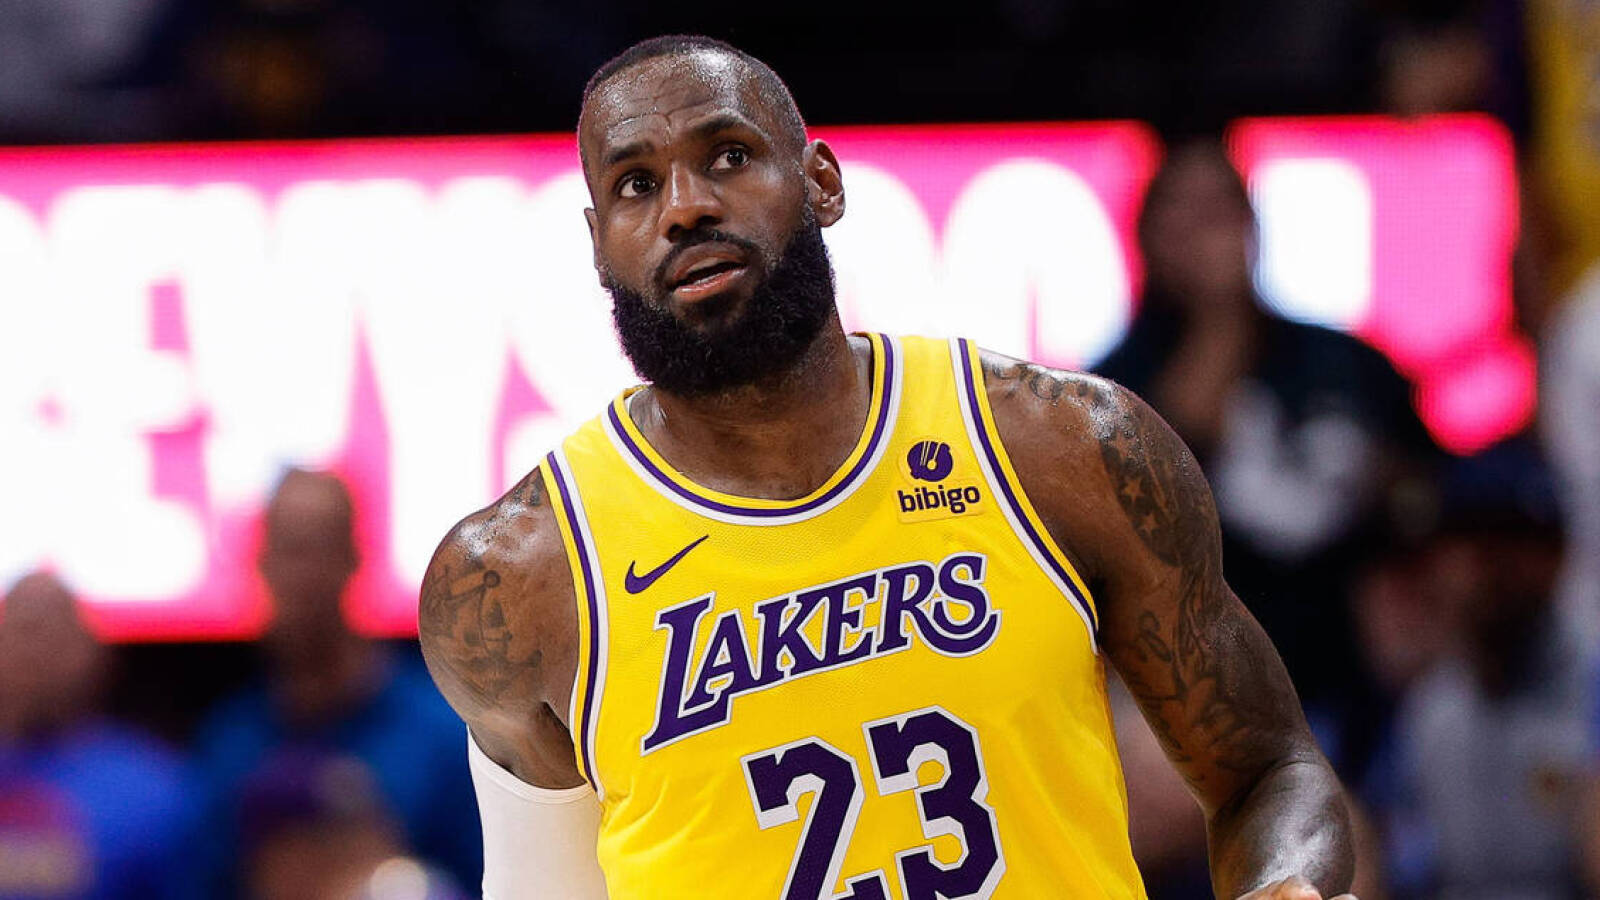 NBA insider: 'All signals' point to LeBron James returning to Lakers